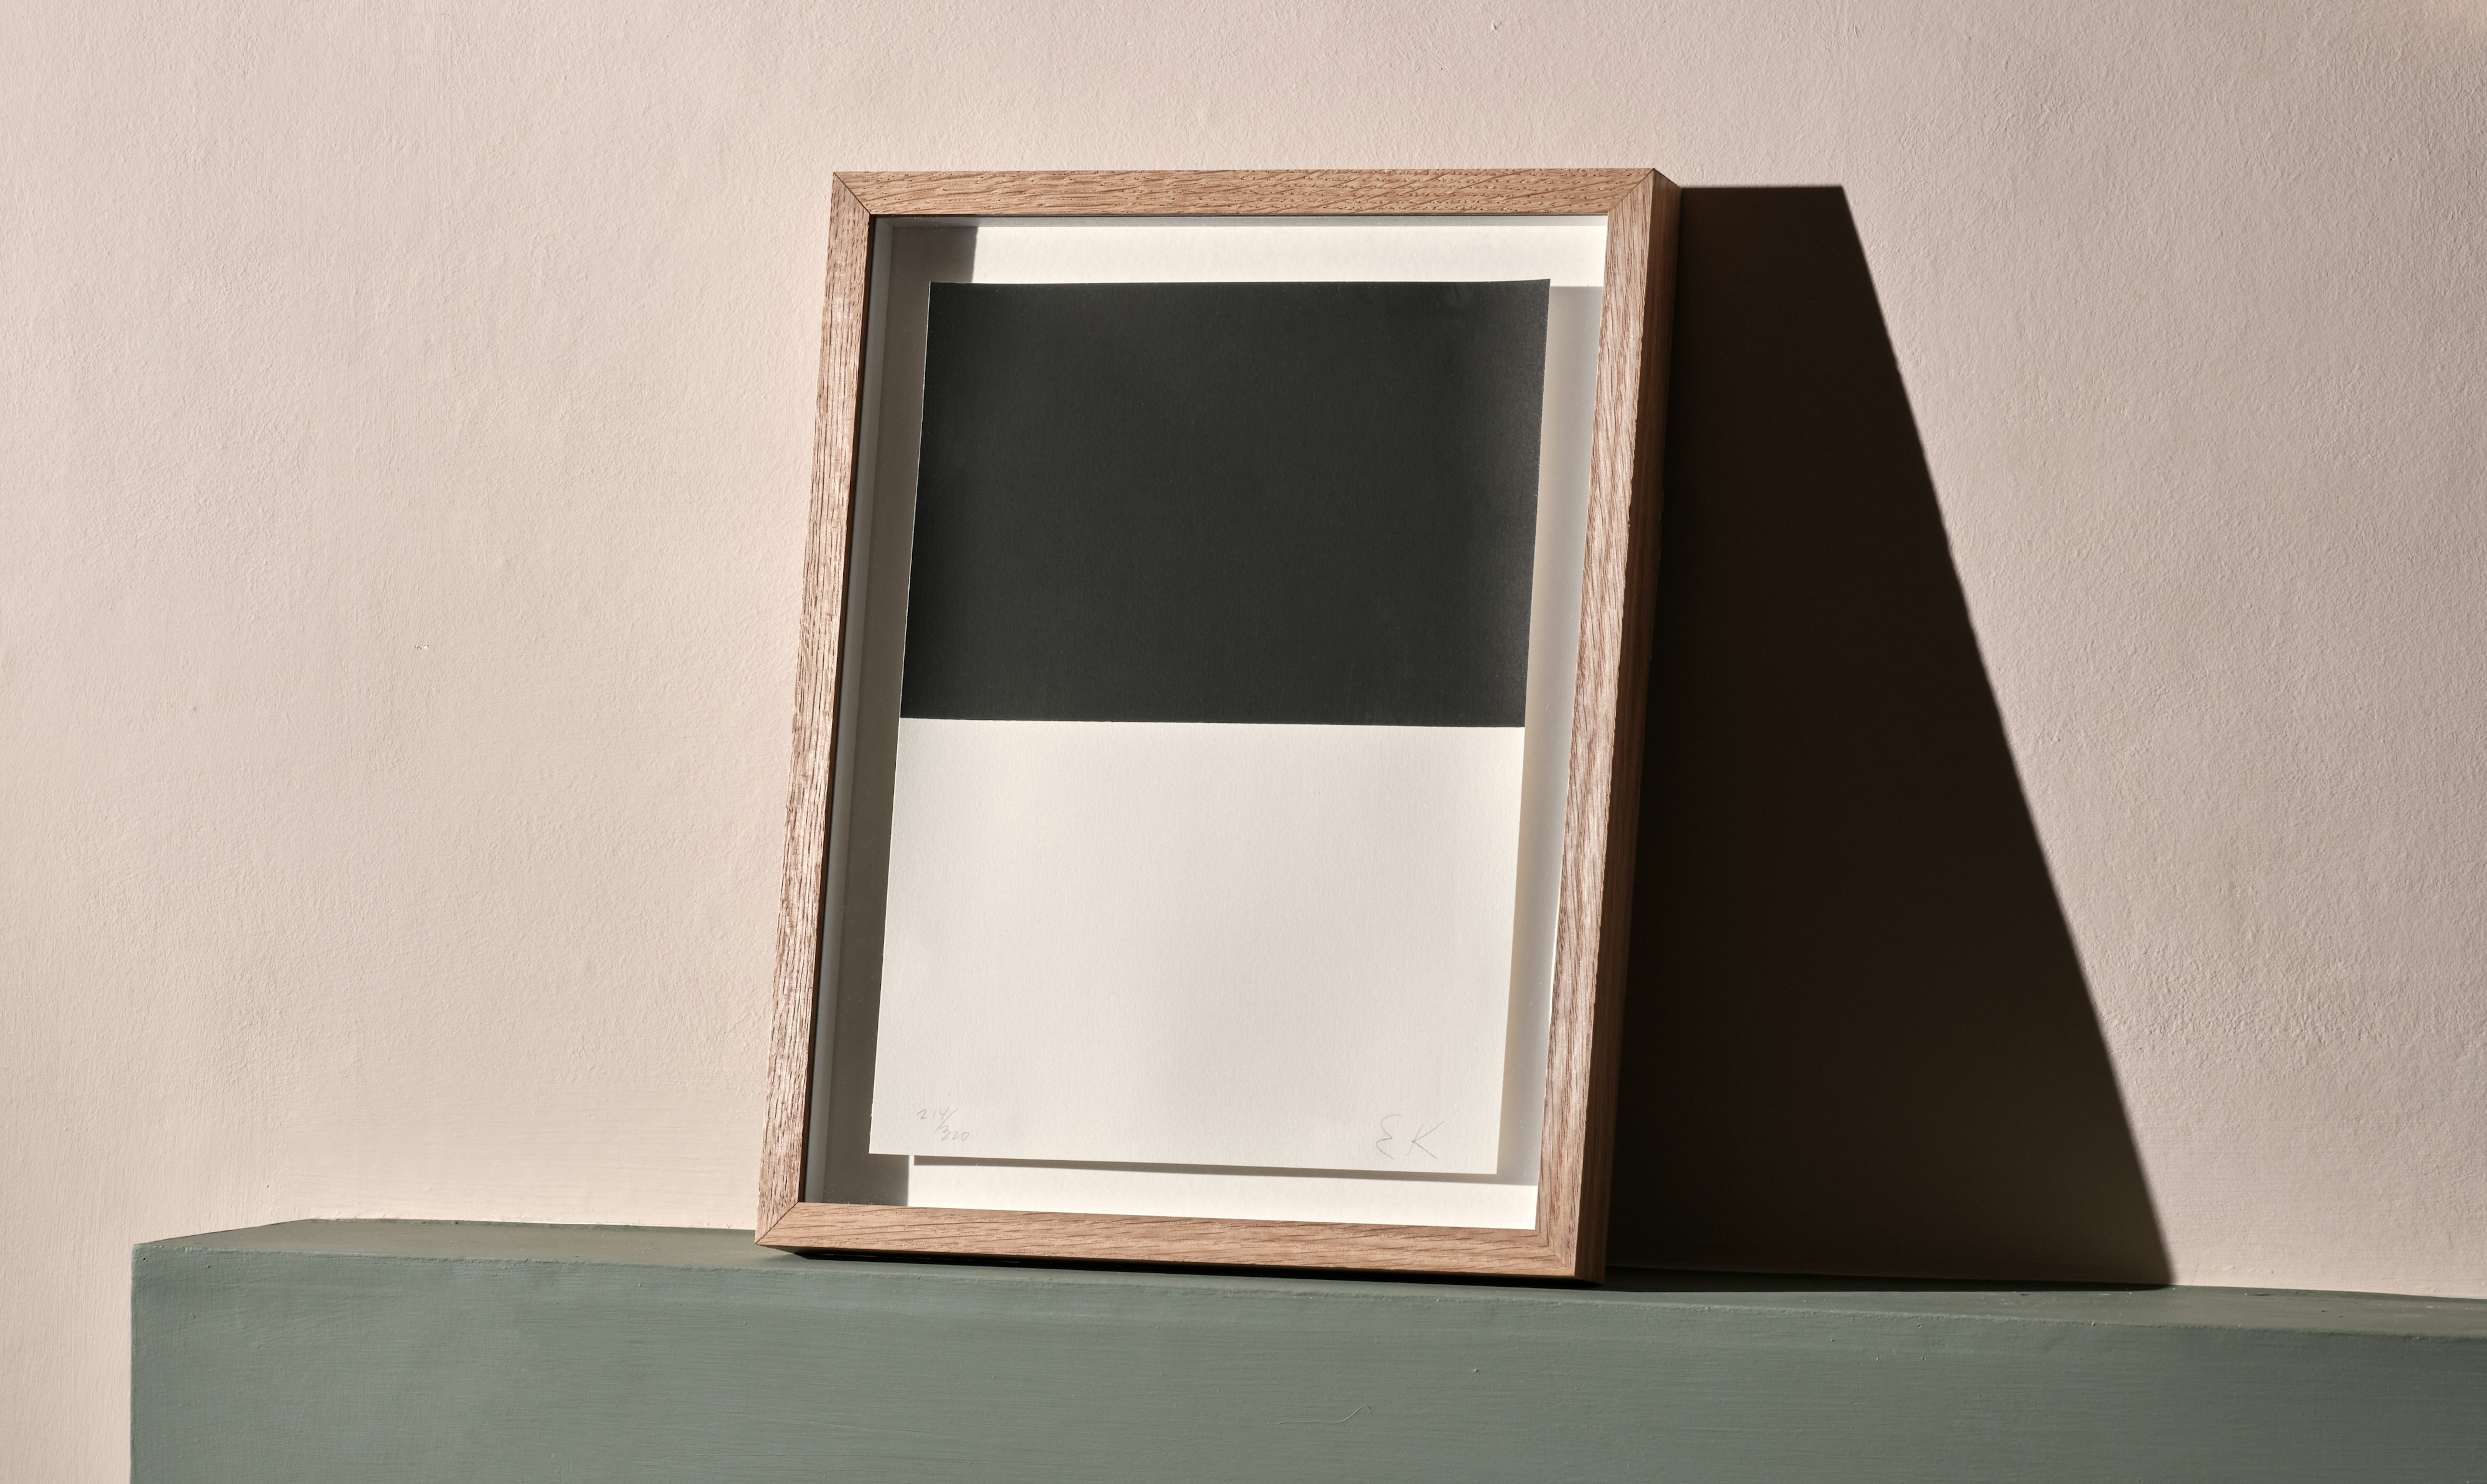 Installation photo of framed abstract screenprint by Ellsworth Kelly with upper half printed in black and lower half white.